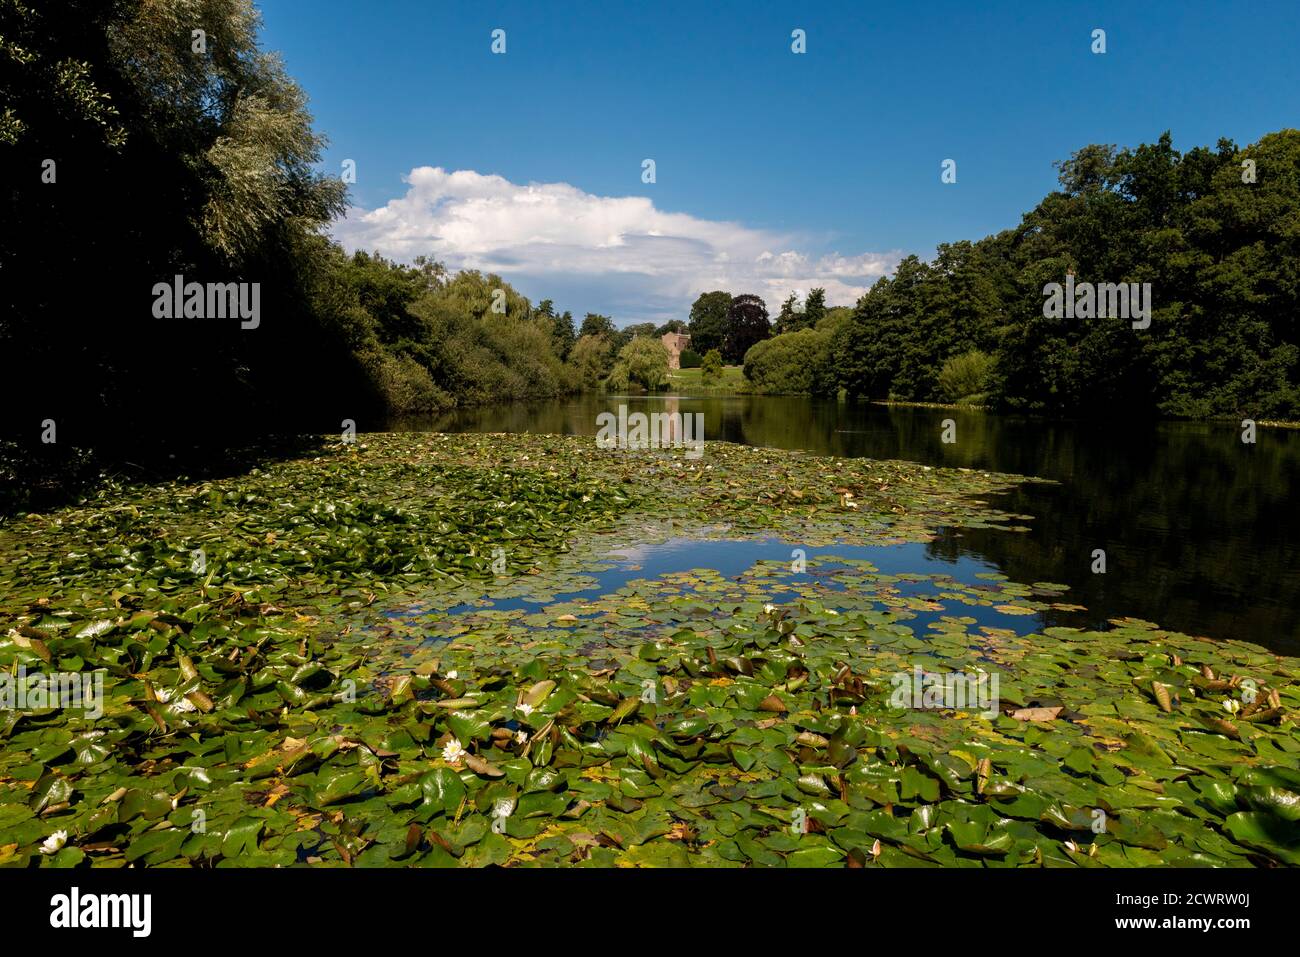 Pond and Lilly pads, Newstead Abbey, Nottingham, England,UK Stock Photo